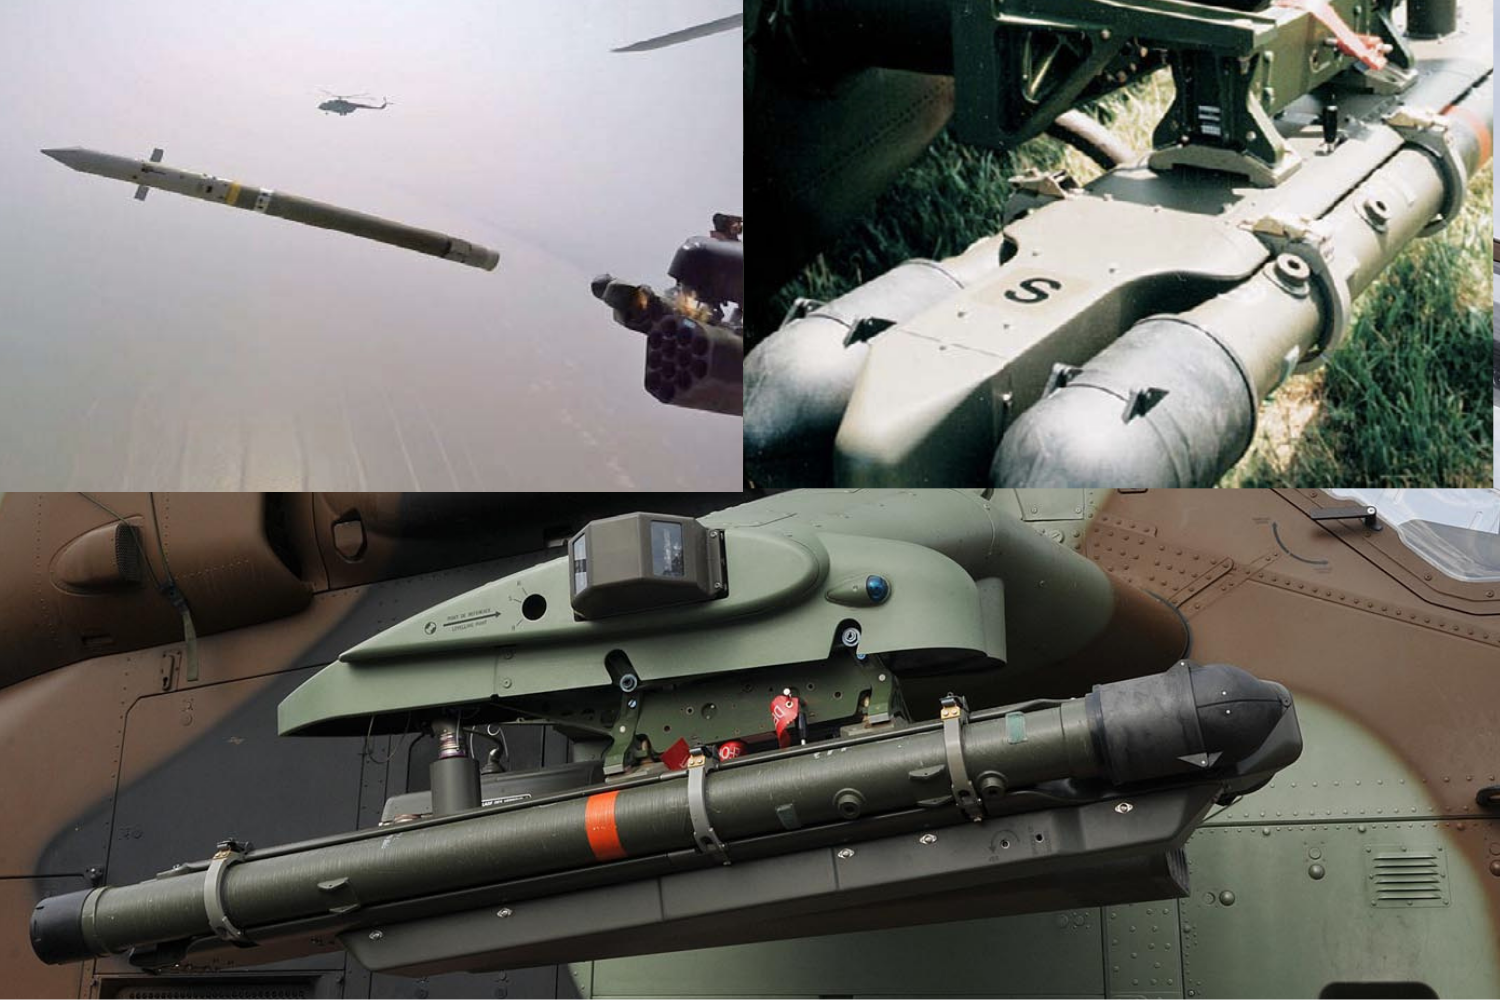 MBDA’s Mistral Missile to Arm Korean Marine Attack Helicopters